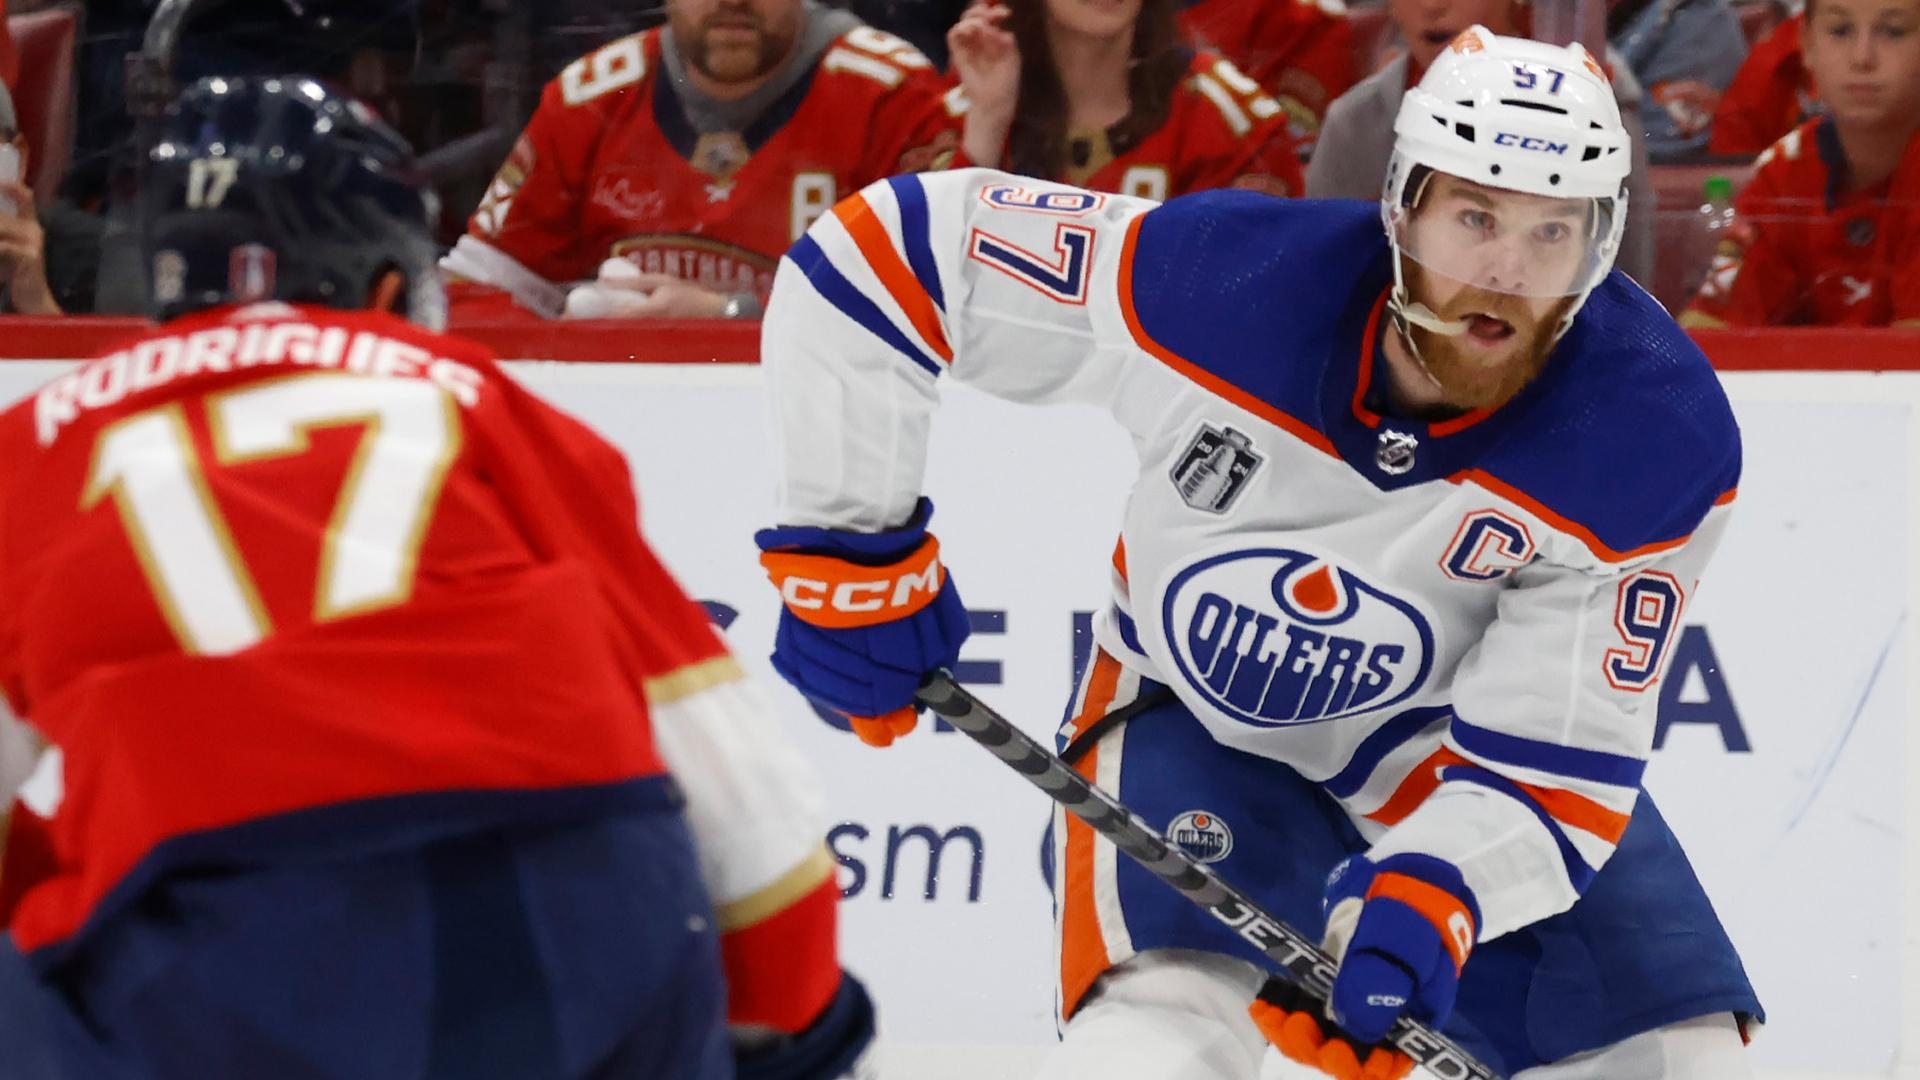 Connor McDavid plays hero for Oilers with 4-point performance